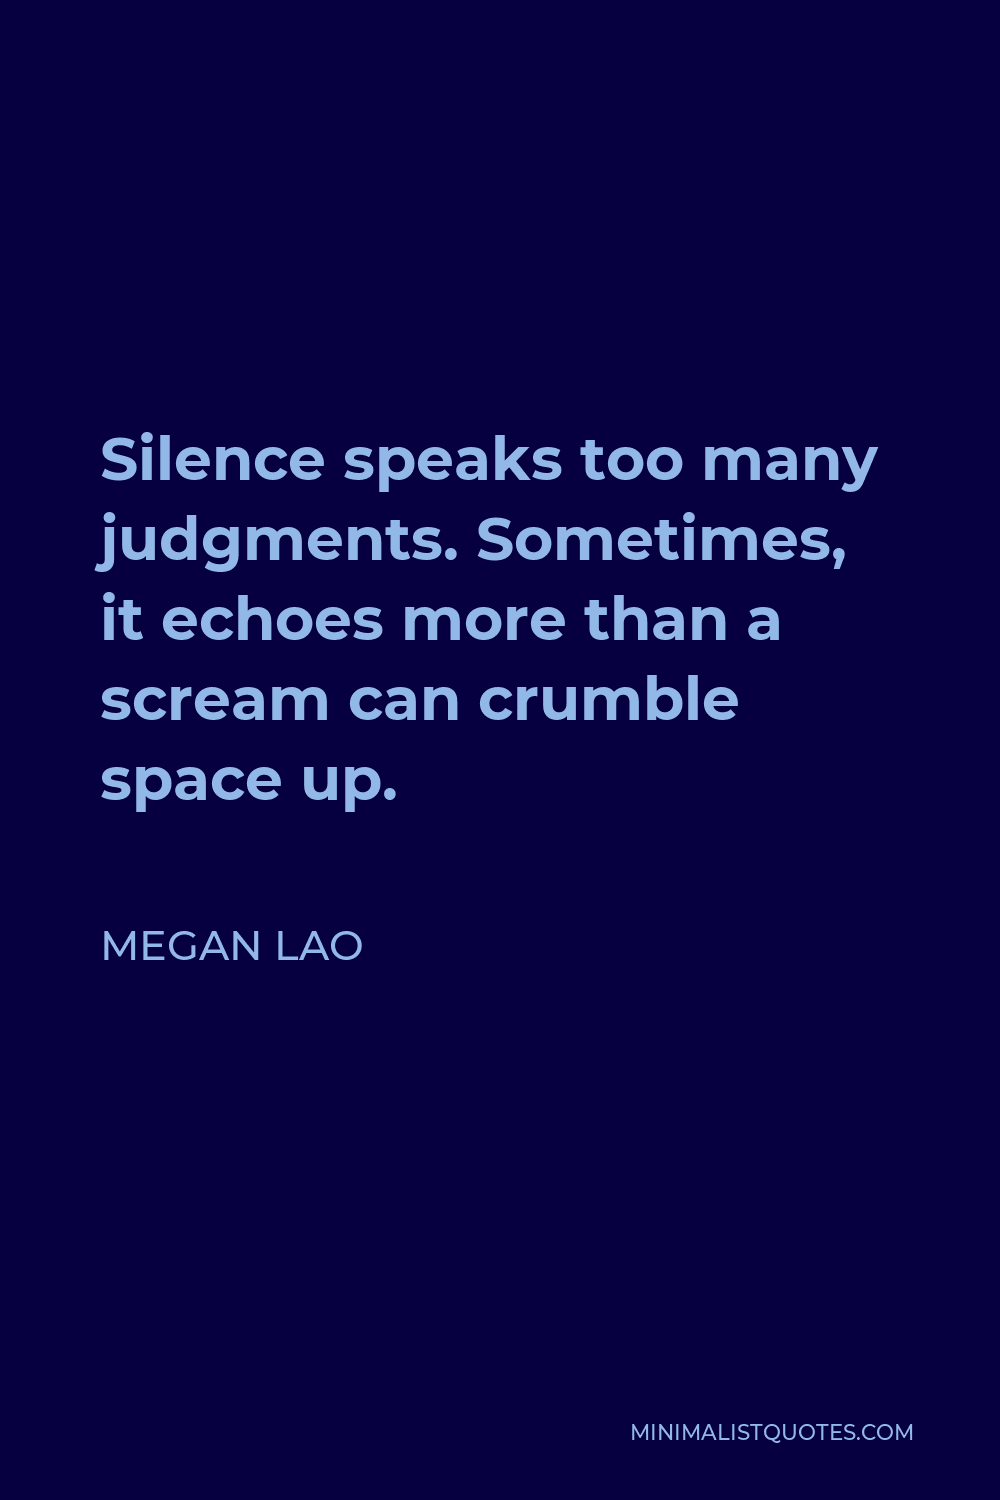 Megan Lao Quote - Silence speaks too many judgments. Sometimes, it echoes more than a scream can crumble space up.